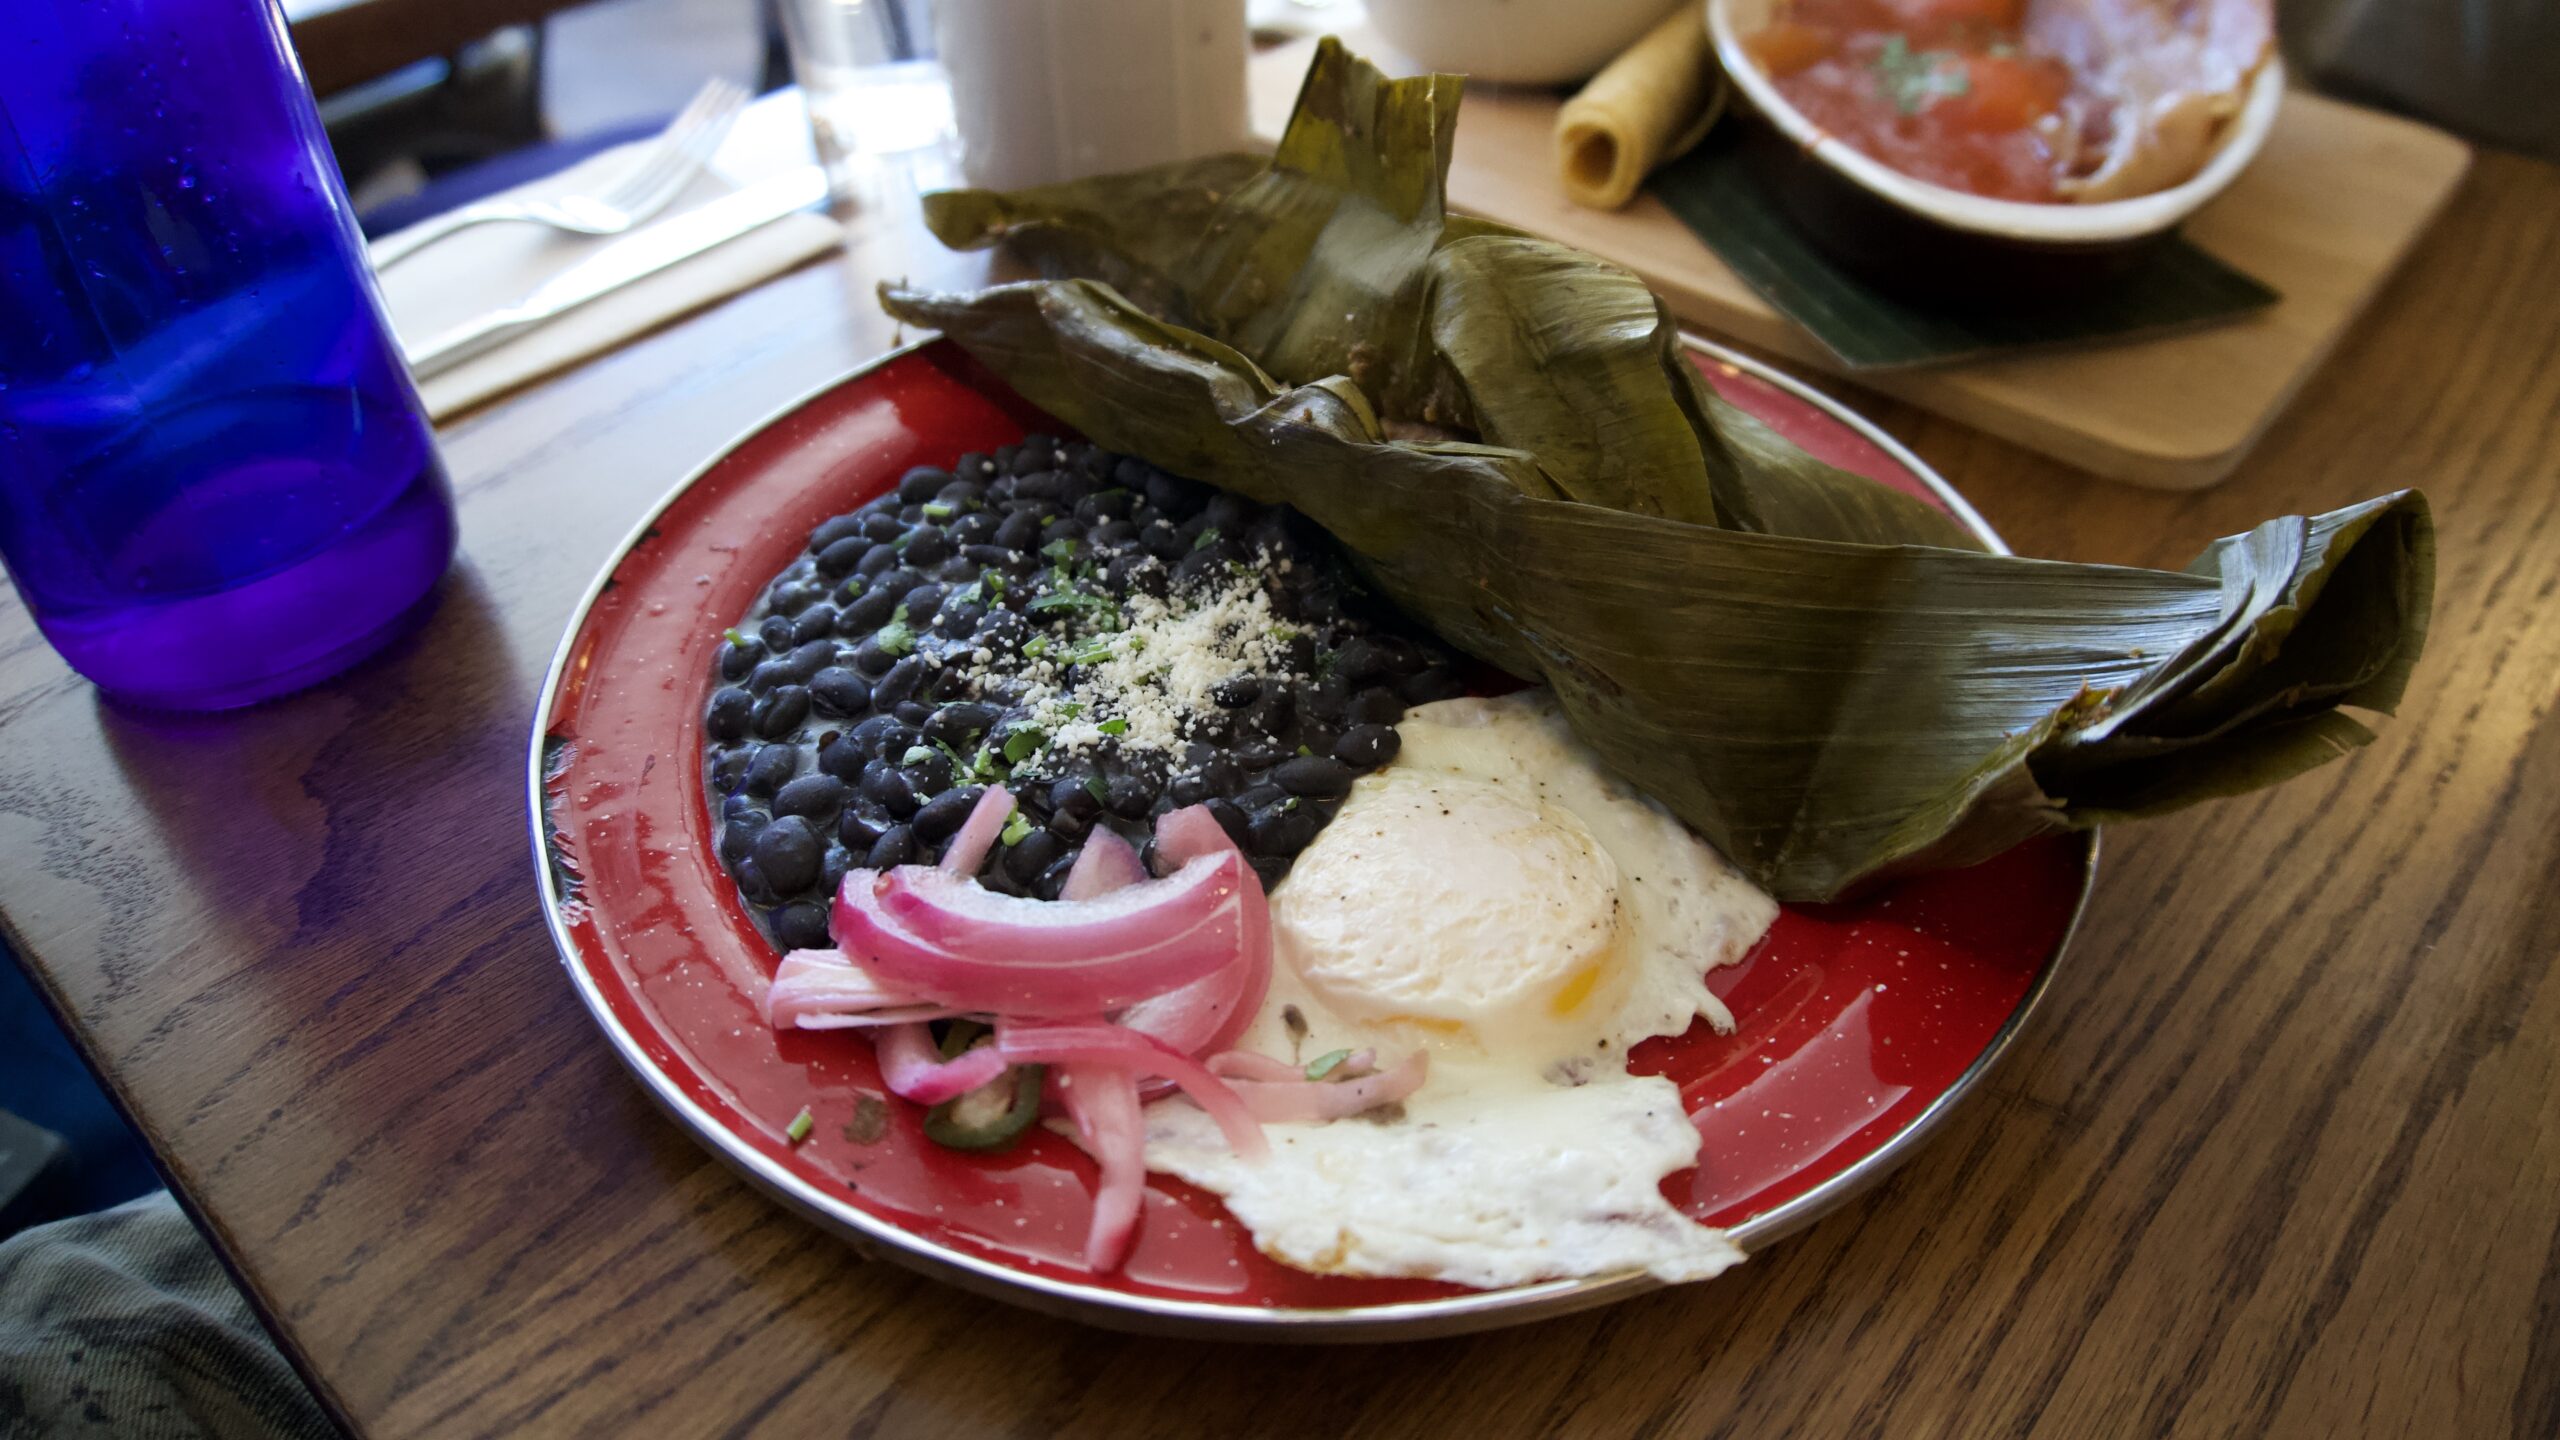 A plate with beans, an egg, and a tamale wrapped in a leaf.